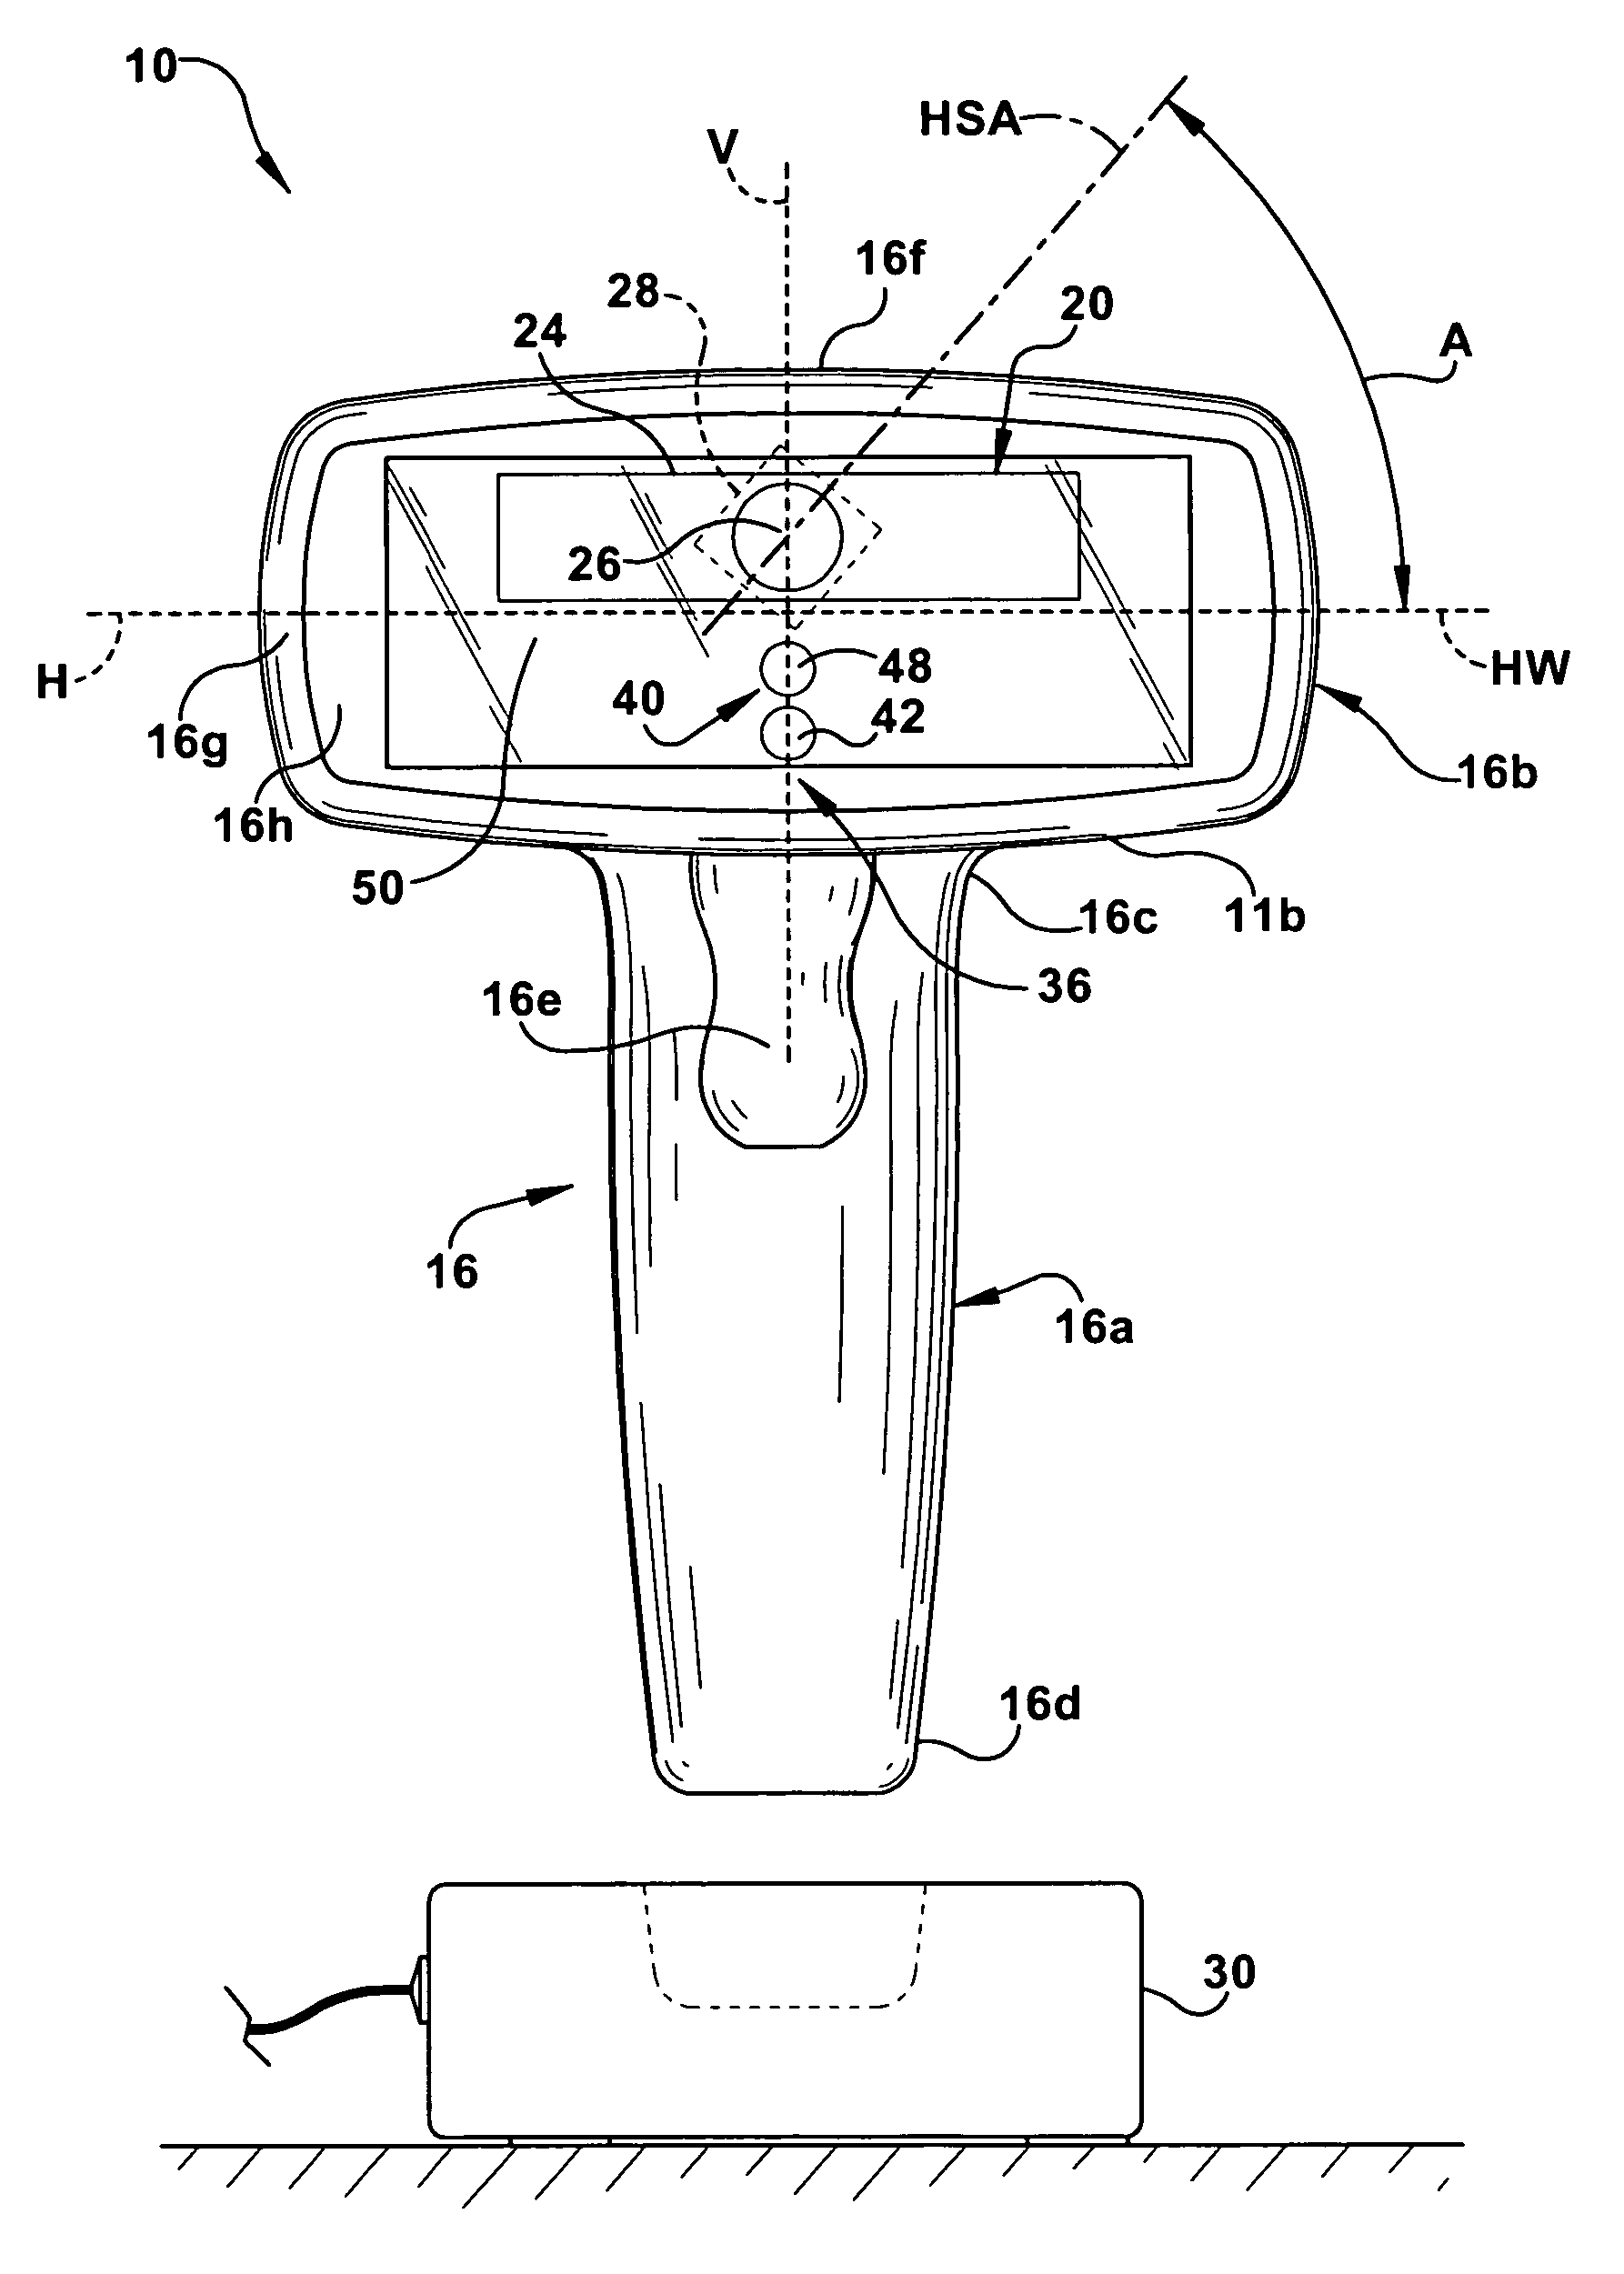 Imaging-based bar code reader with rotated photosensor array